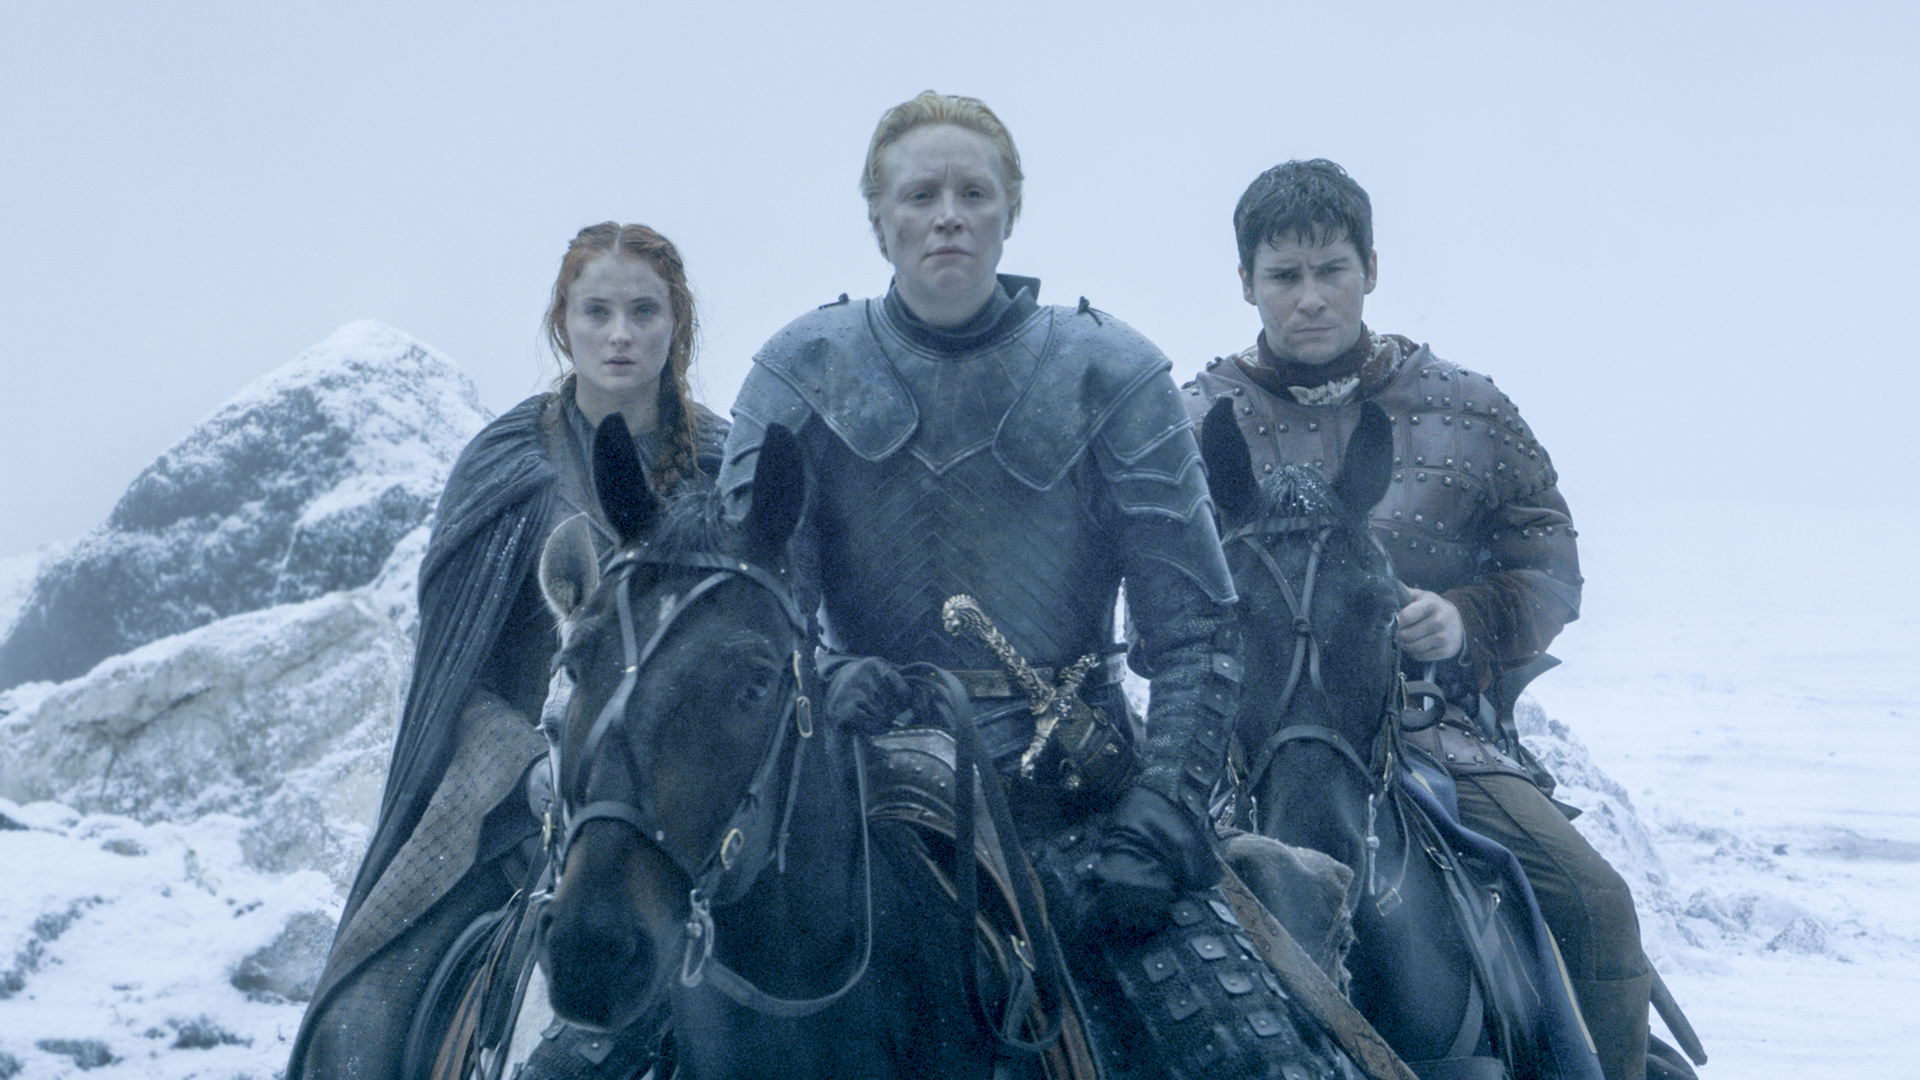 Gwendoline Christie as Brienne of Tarth in HBO's Game of Thrones